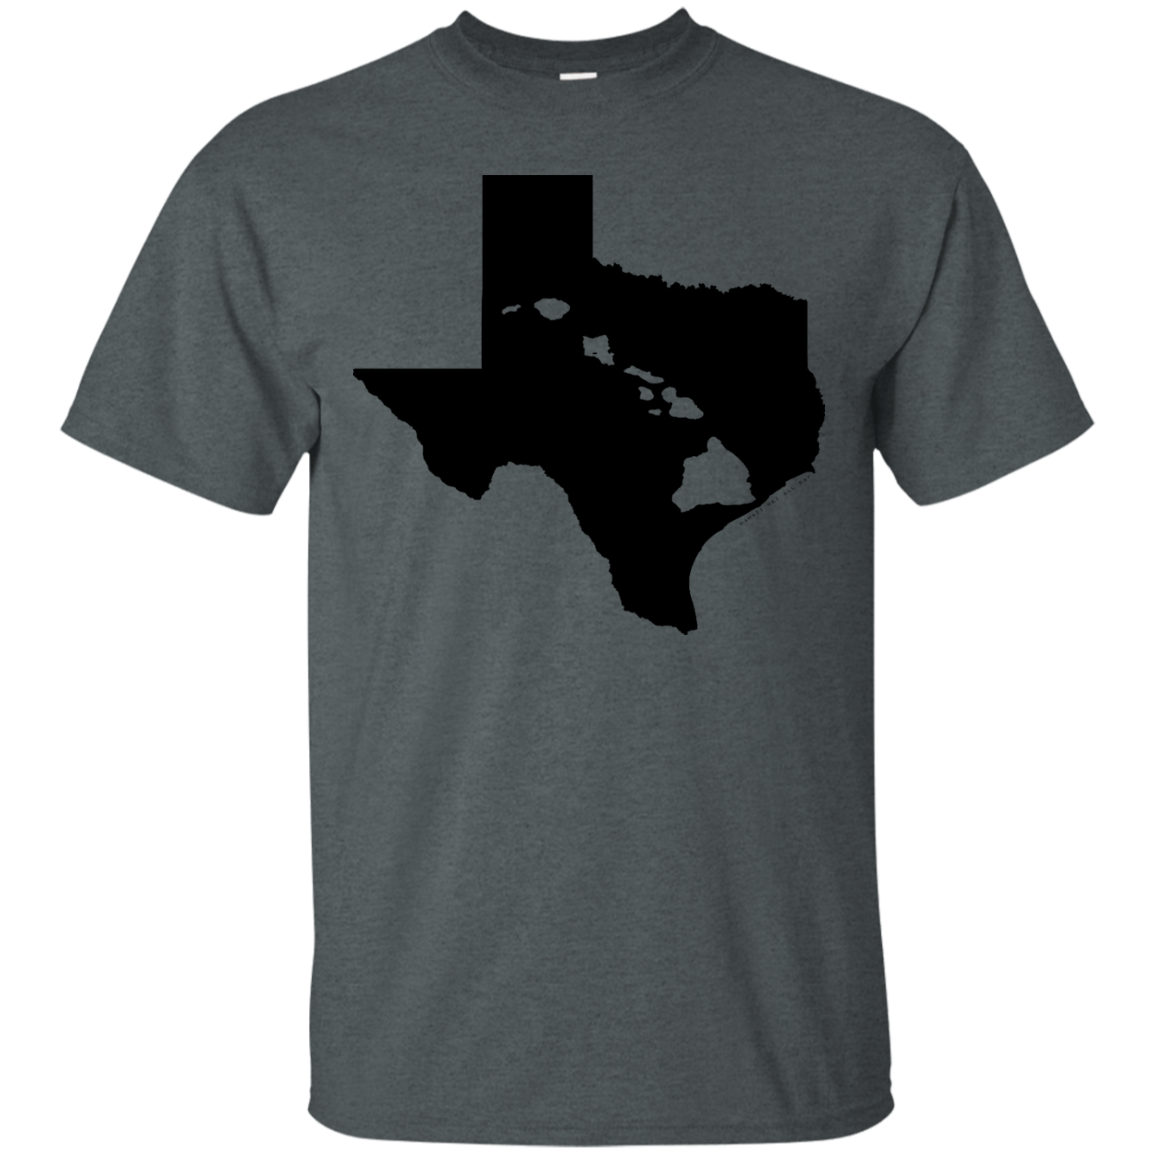 Living in Texas with Hawaii Roots Ultra Cotton T-Shirt - Hawaii Nei All Day